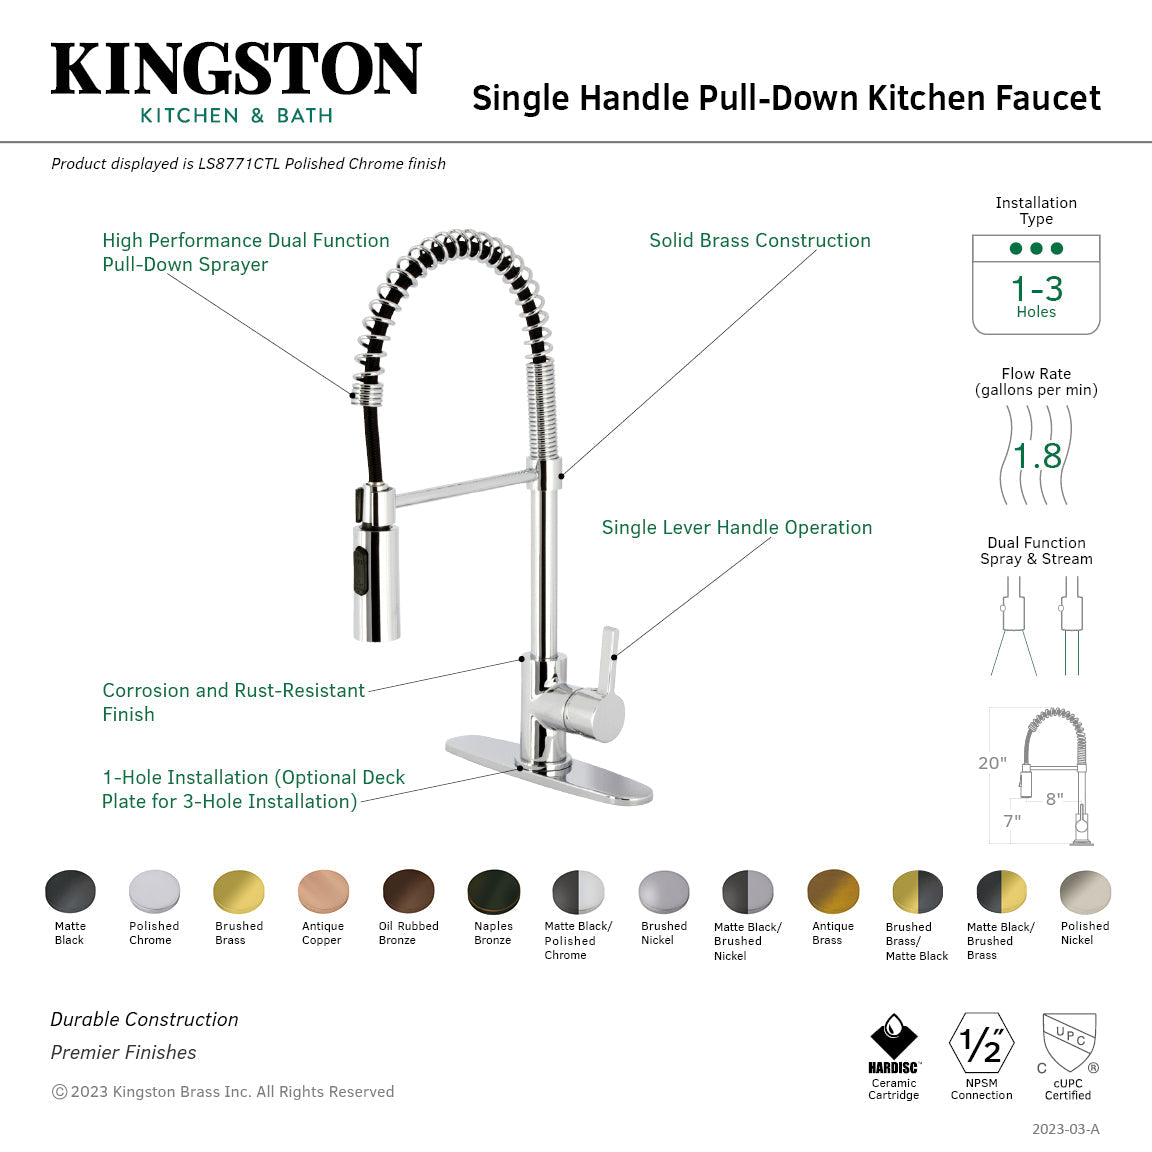 Continental LS877CTLBBMB Single-Handle 1-Hole Deck Mount Pre-Rinse Kitchen Faucet, Brushed Brass/Matte Black